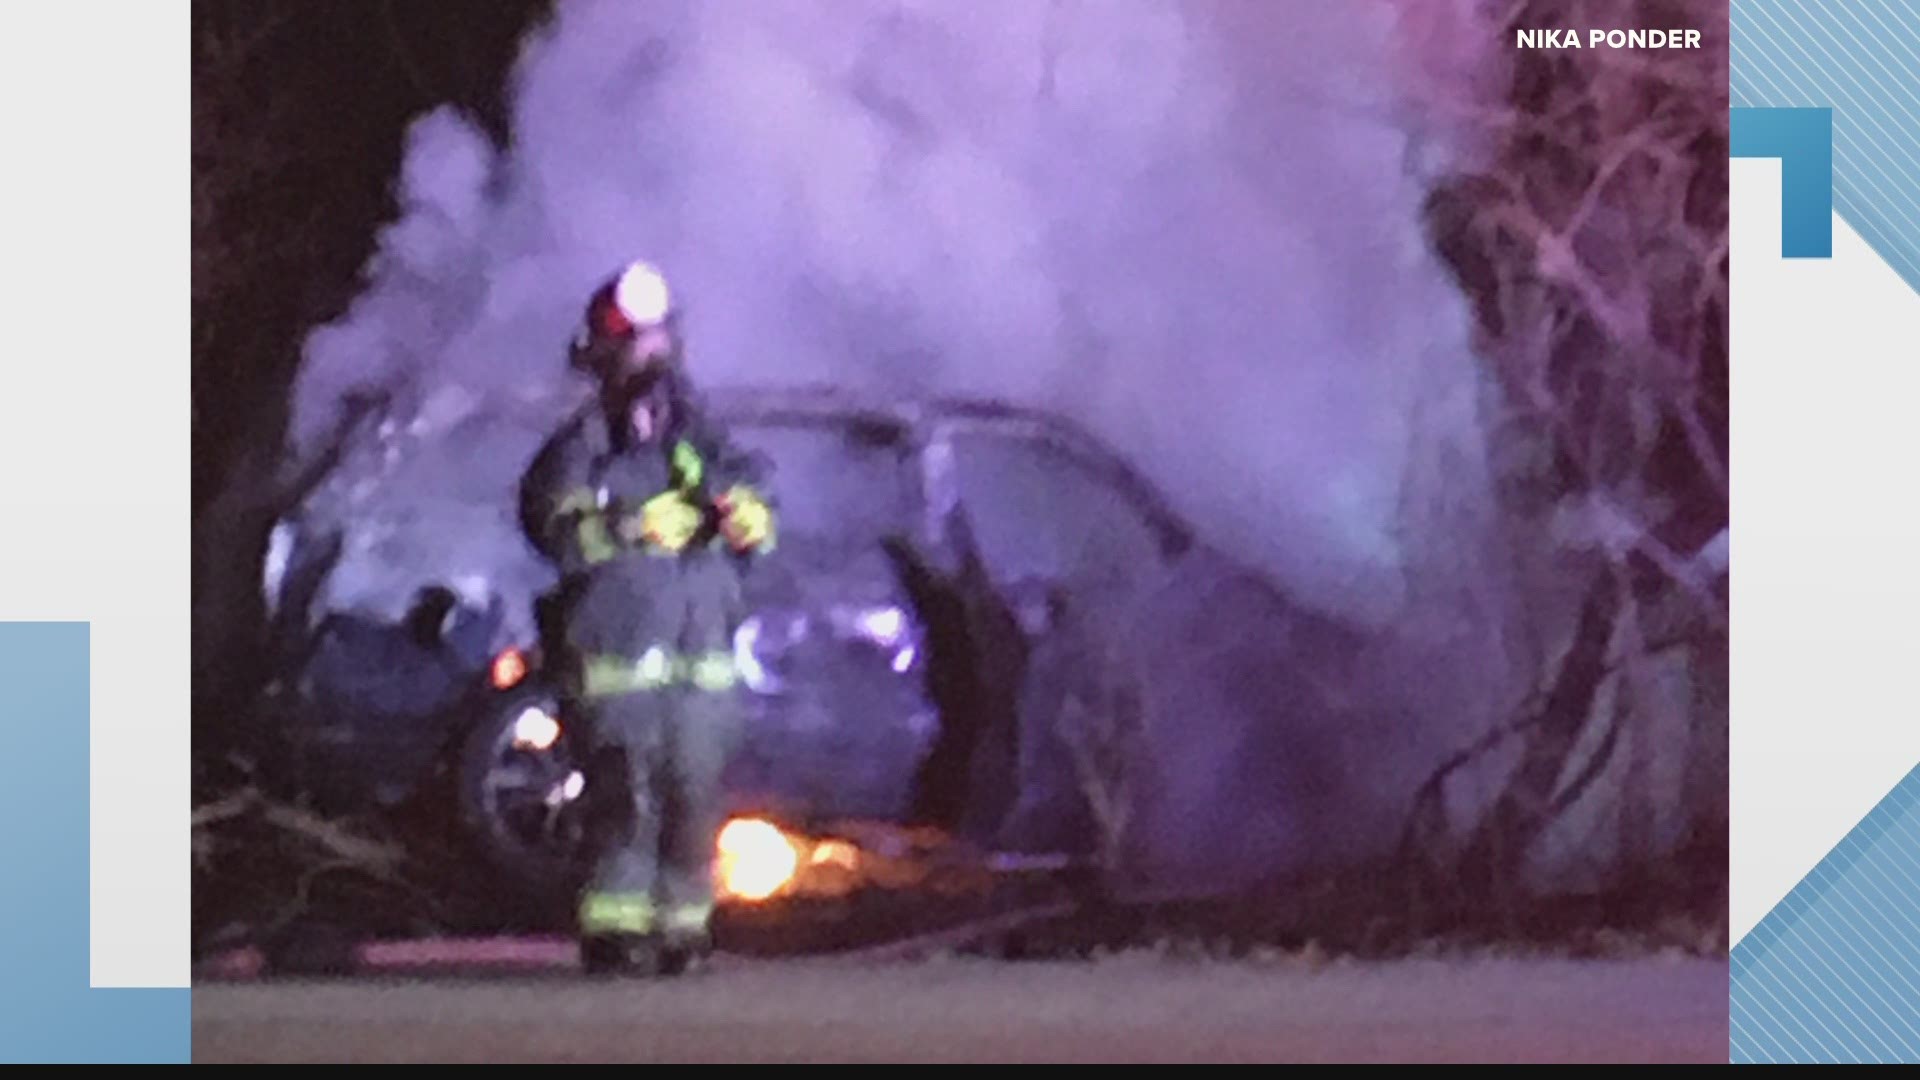 Police said the car struck a tree and caught on fire